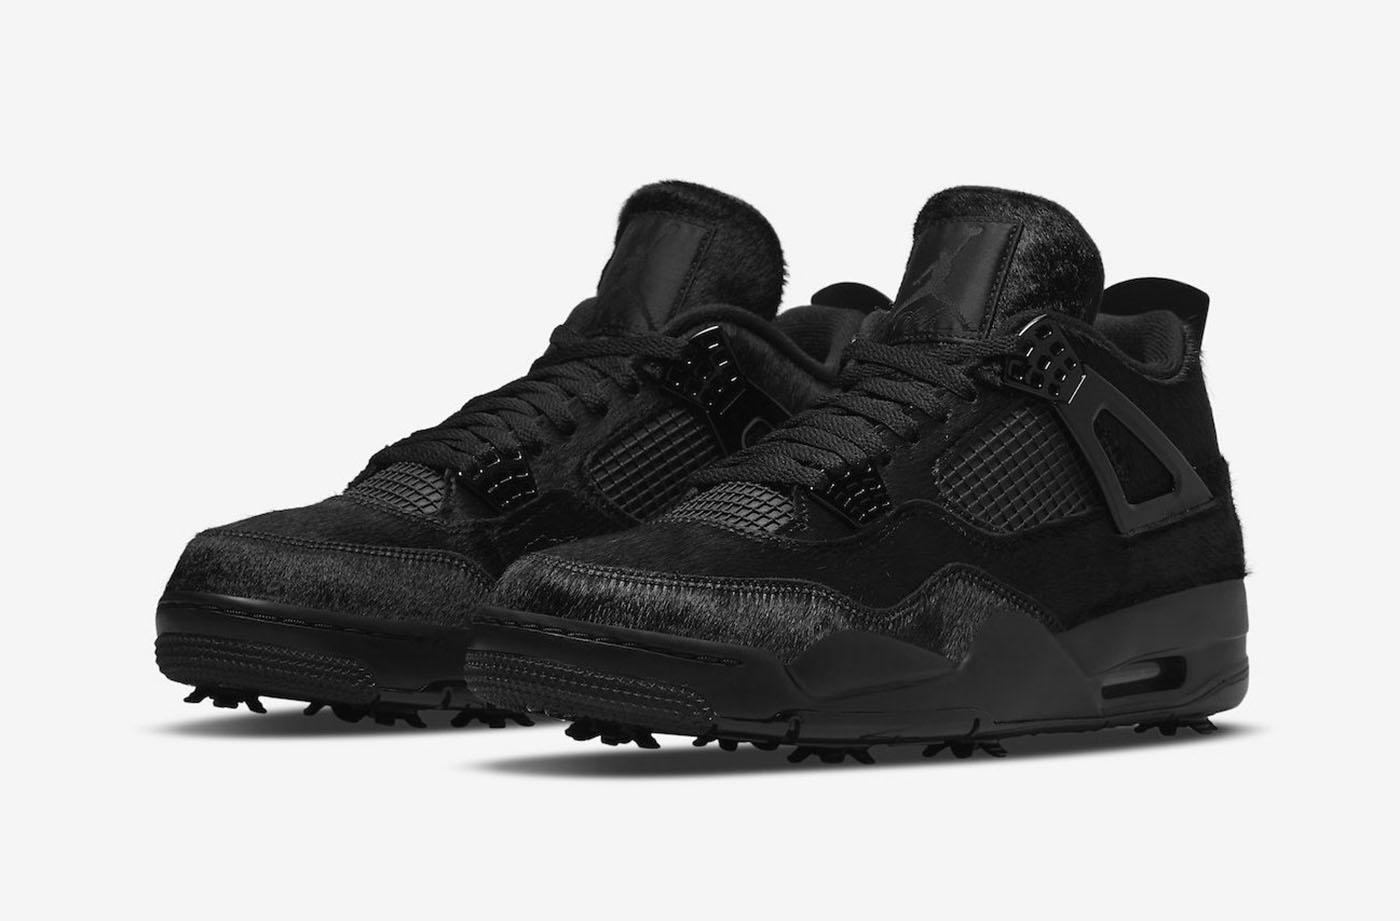 What y'all thinking? Jordan 4 SB Black Cats rumored release? : r/Sneakers